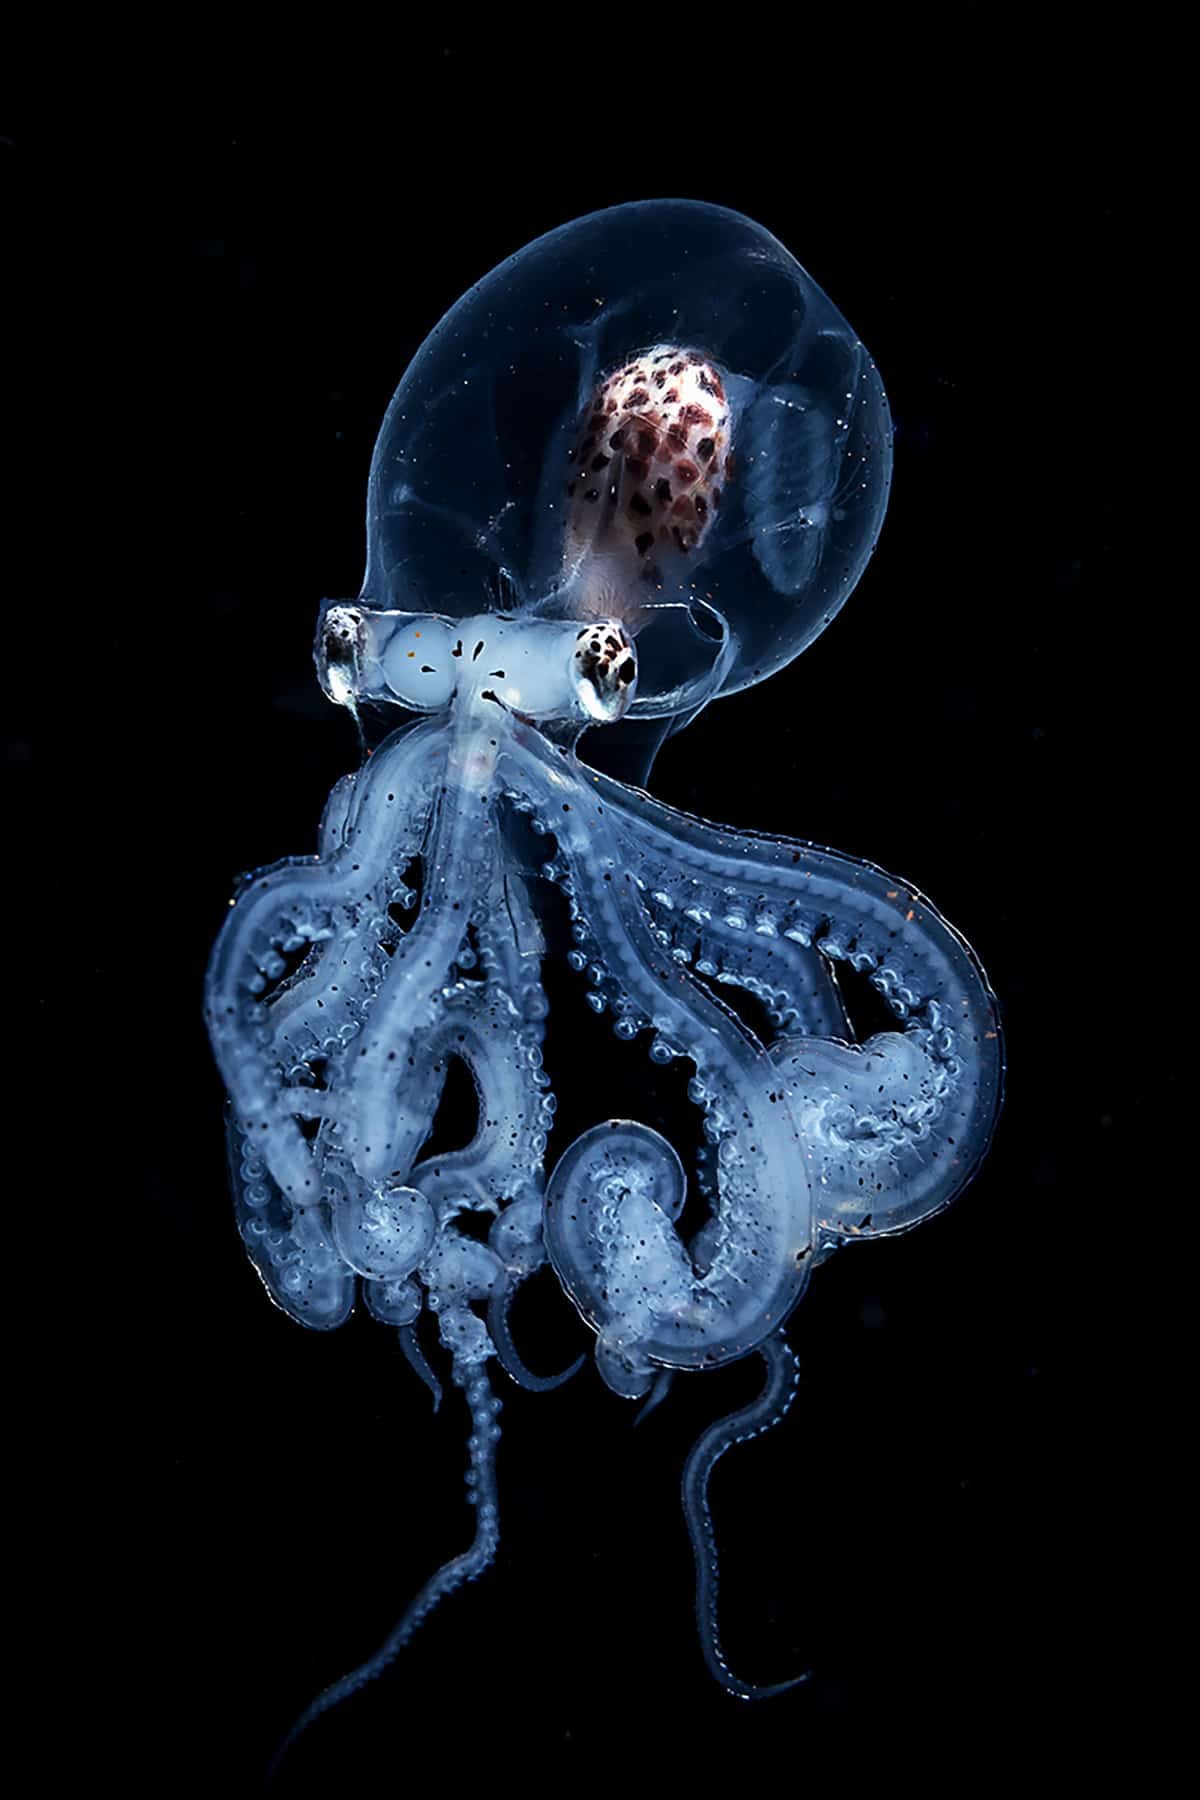 Transparency glass octopus with a leopard-spotted brain visible